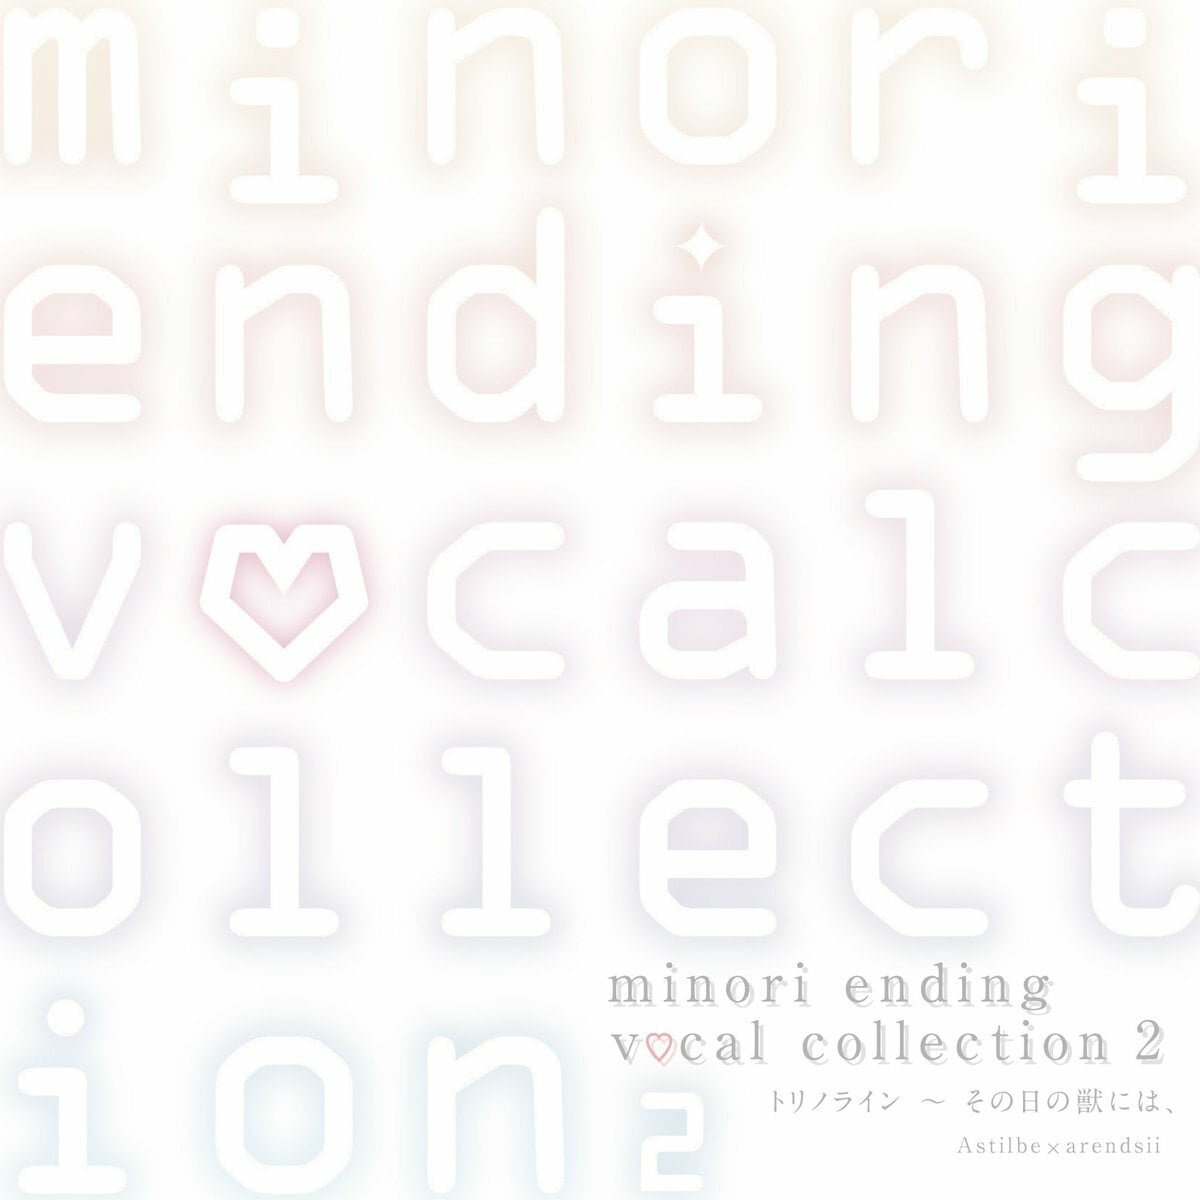 minori ending vocal collection 2 / Astilbe x arendsii